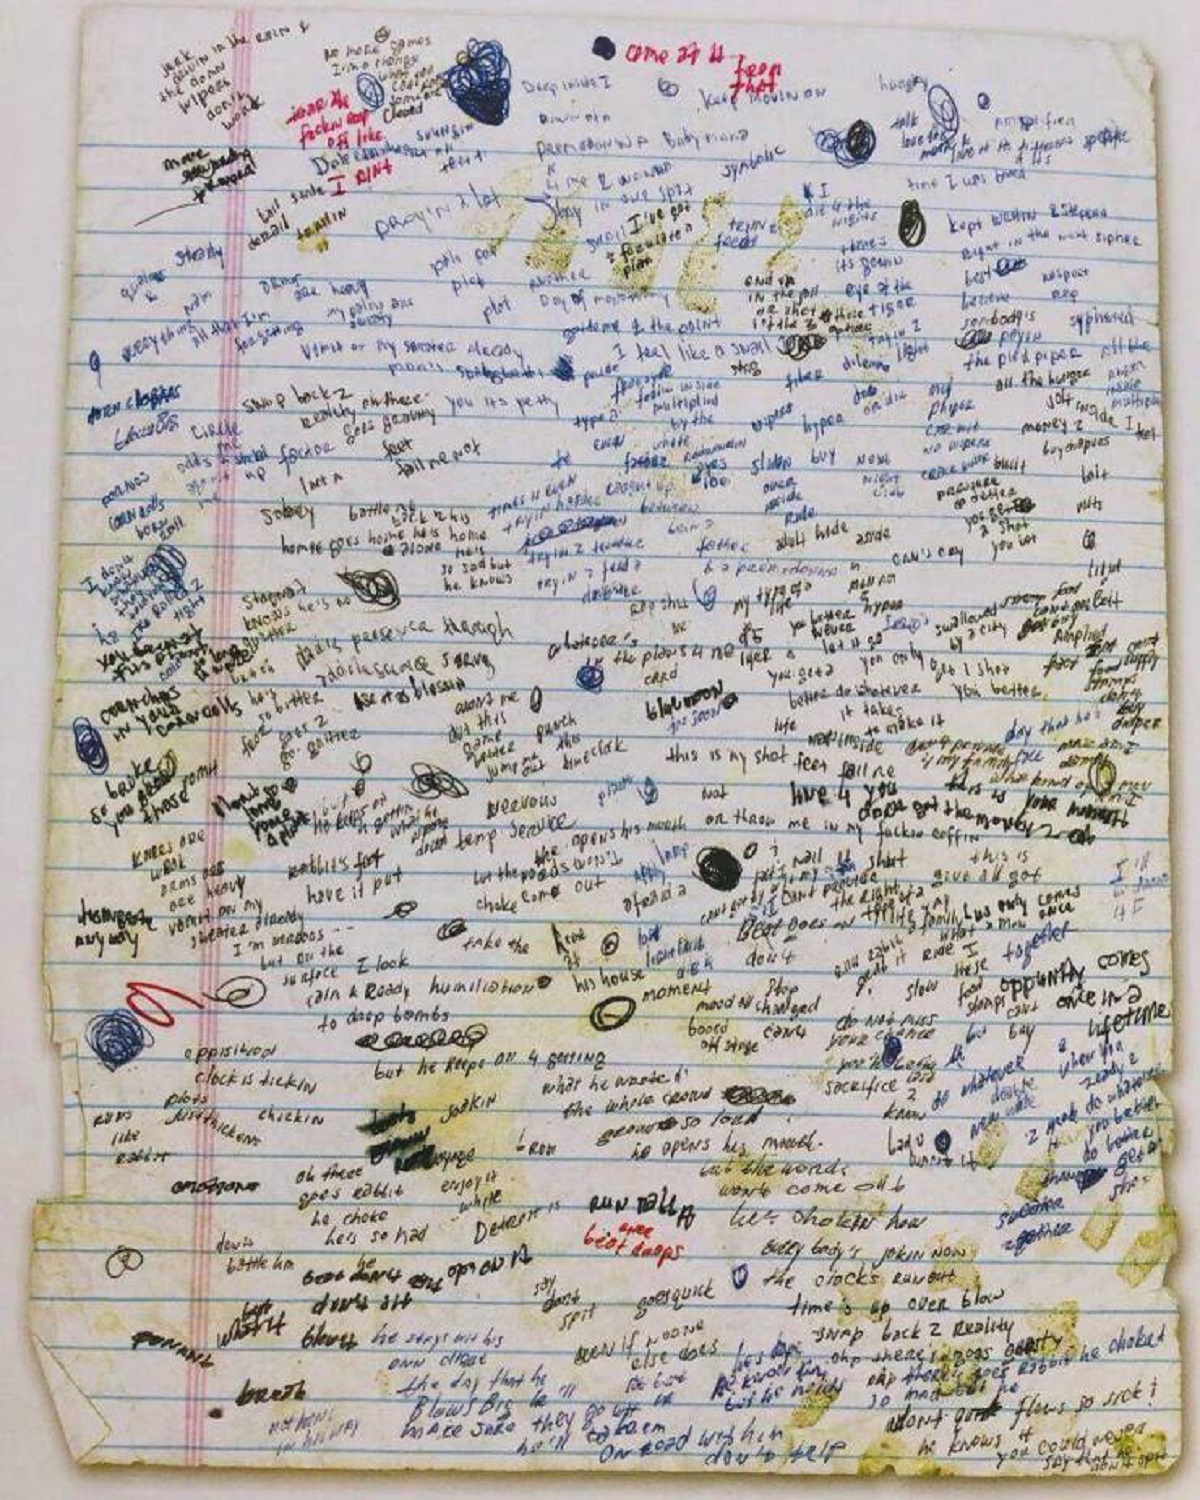 Eminems loose-leaf notes and lyrics to “Lose Yourself”